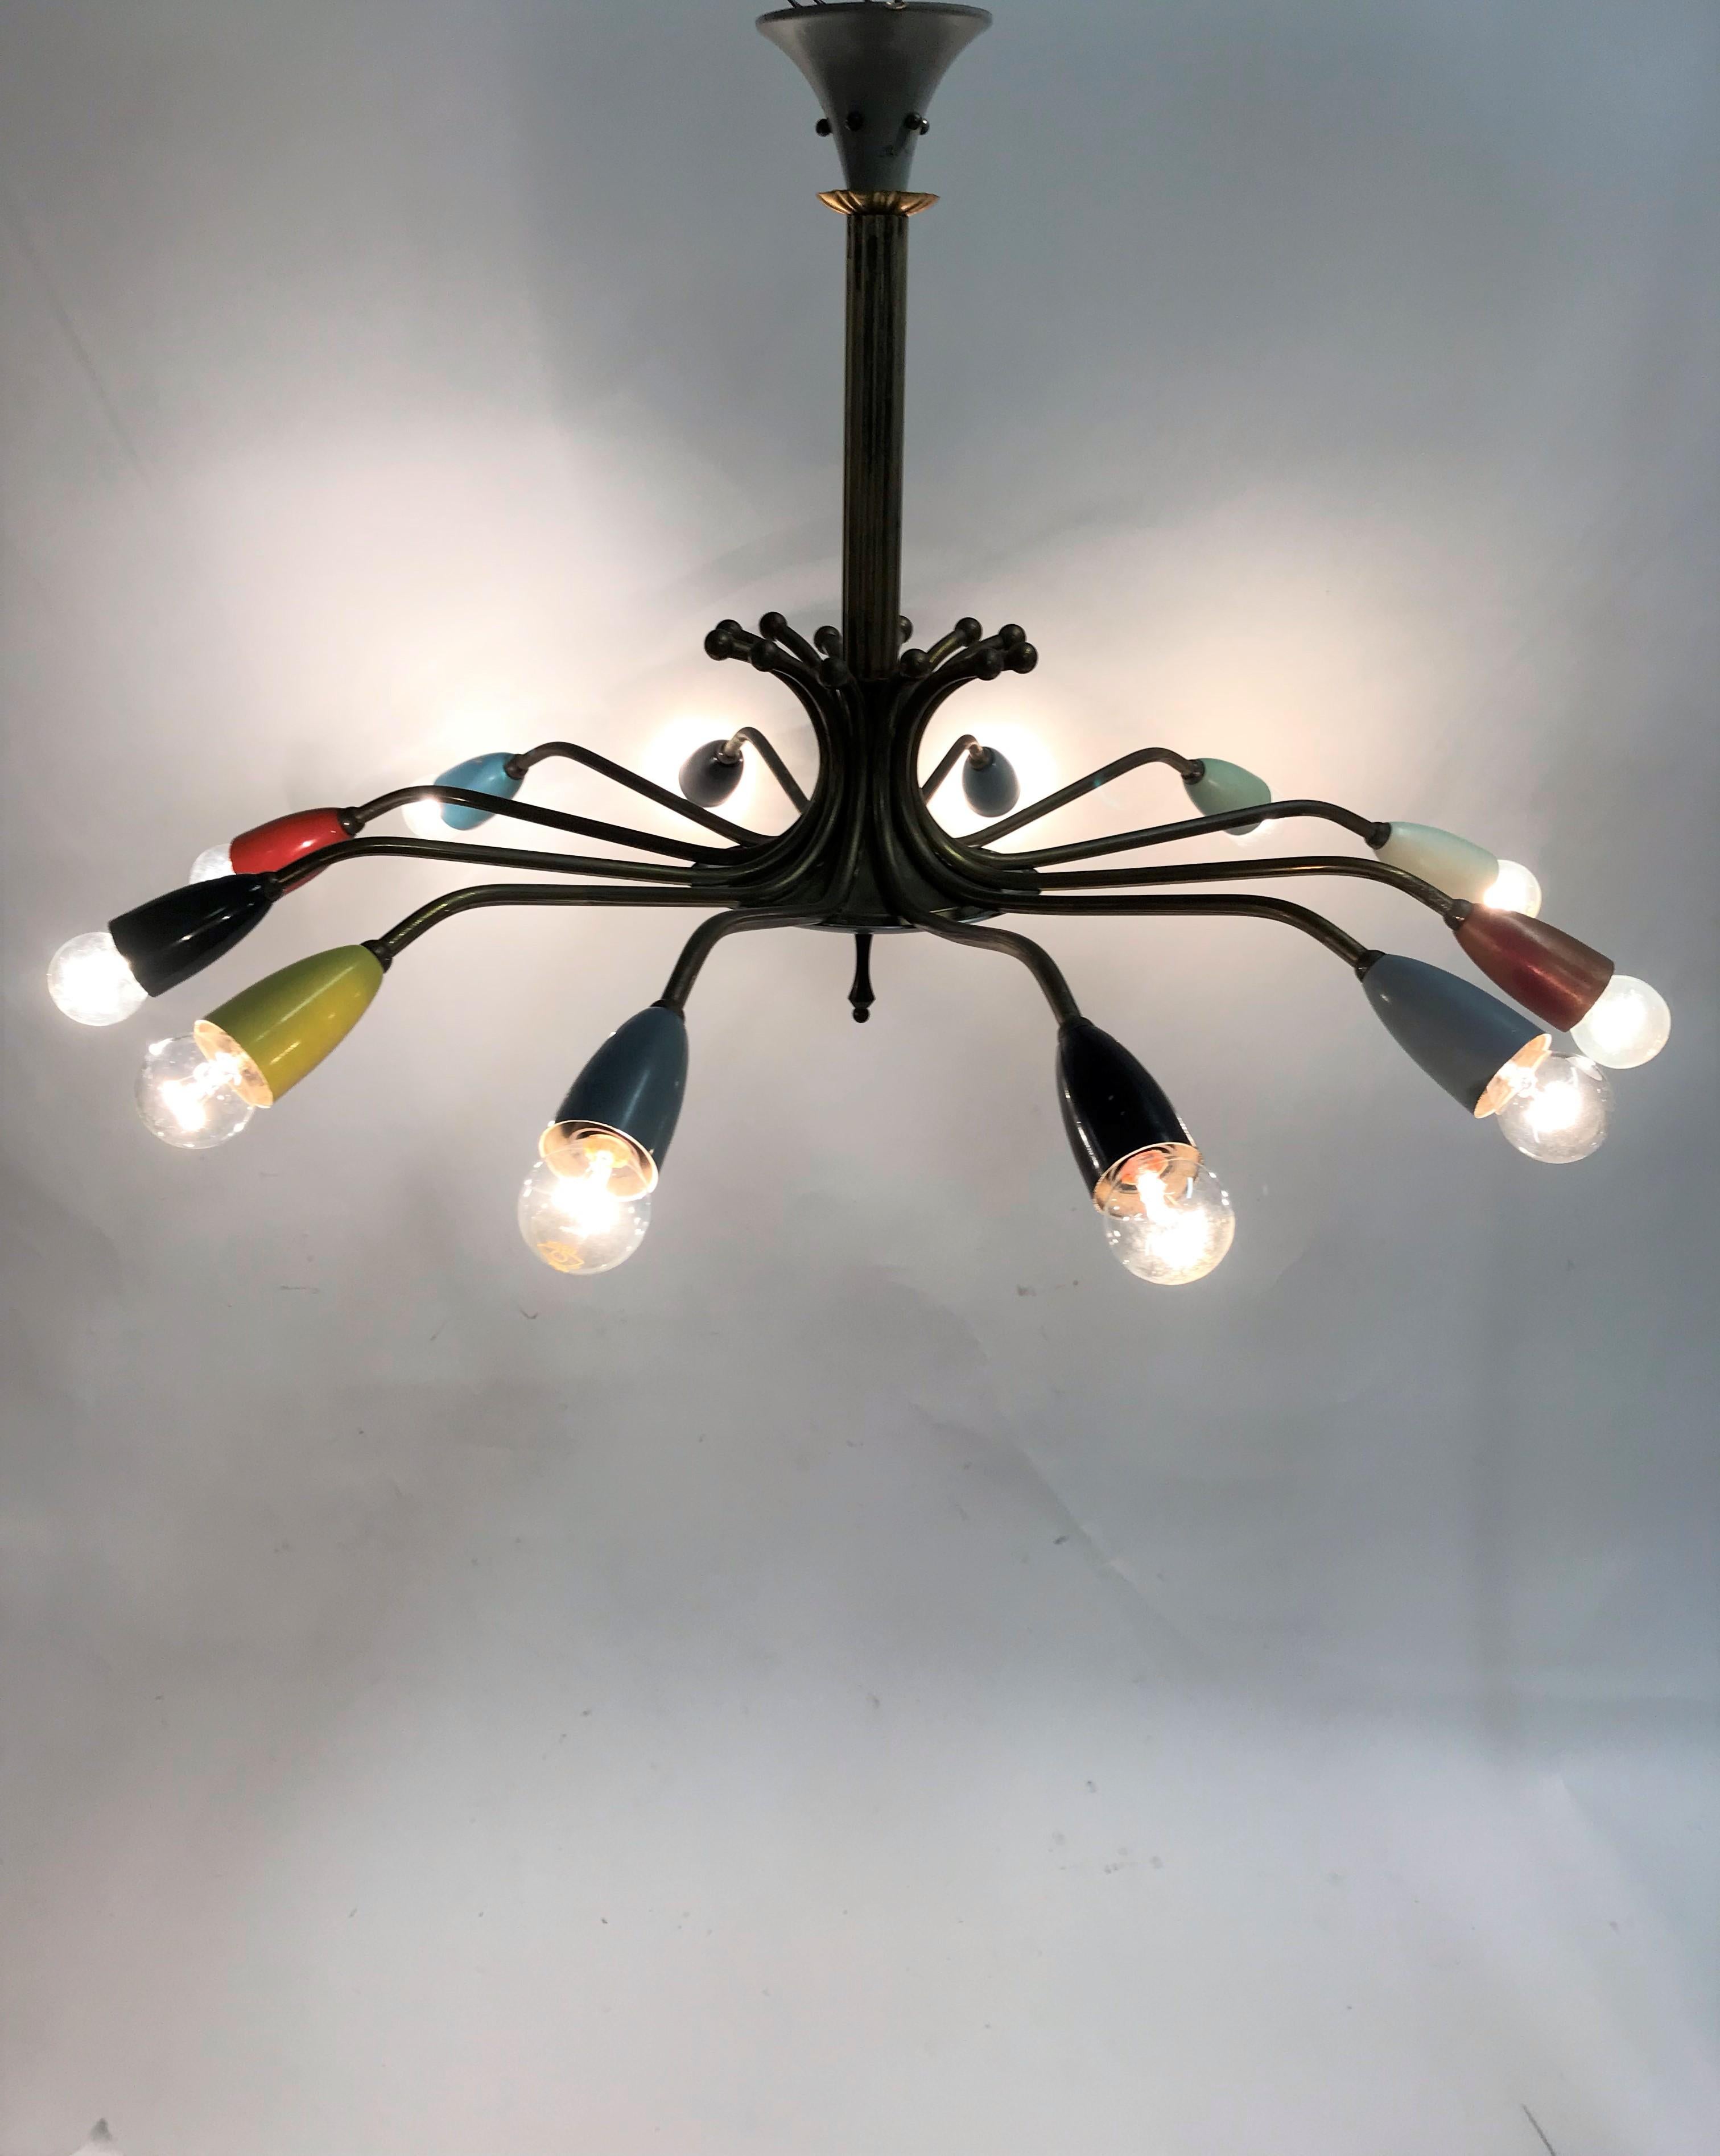 Beautiful midcentury 12-arm spider chandelier made from brass and lacquered metal. The Light bulb holders are made from metal as is rarely the case.

This charming high-quality chandelier is a wonderful original piece that could be the perfect